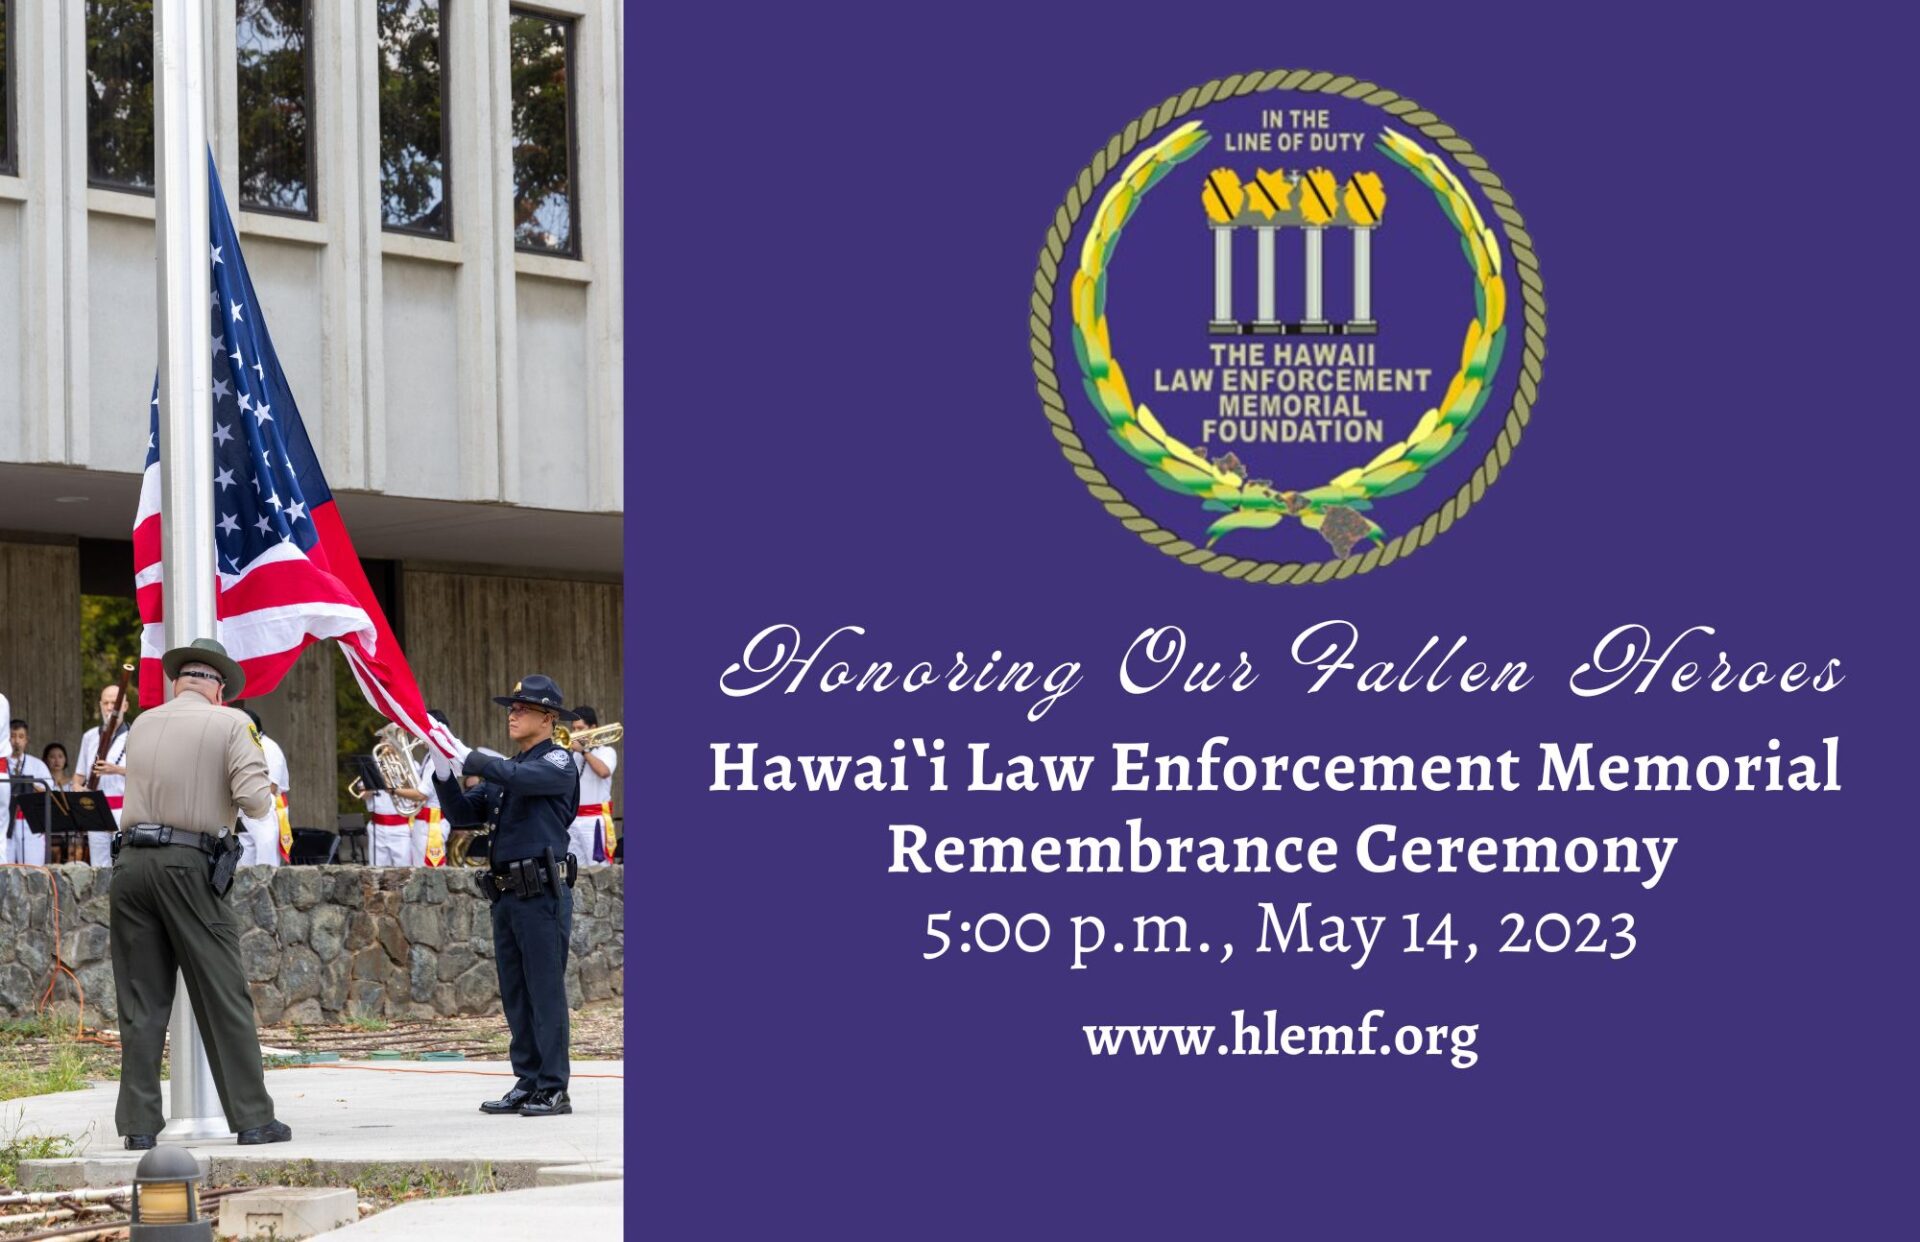 flyr Hawaii law enforcement memorial remembrance ceremony